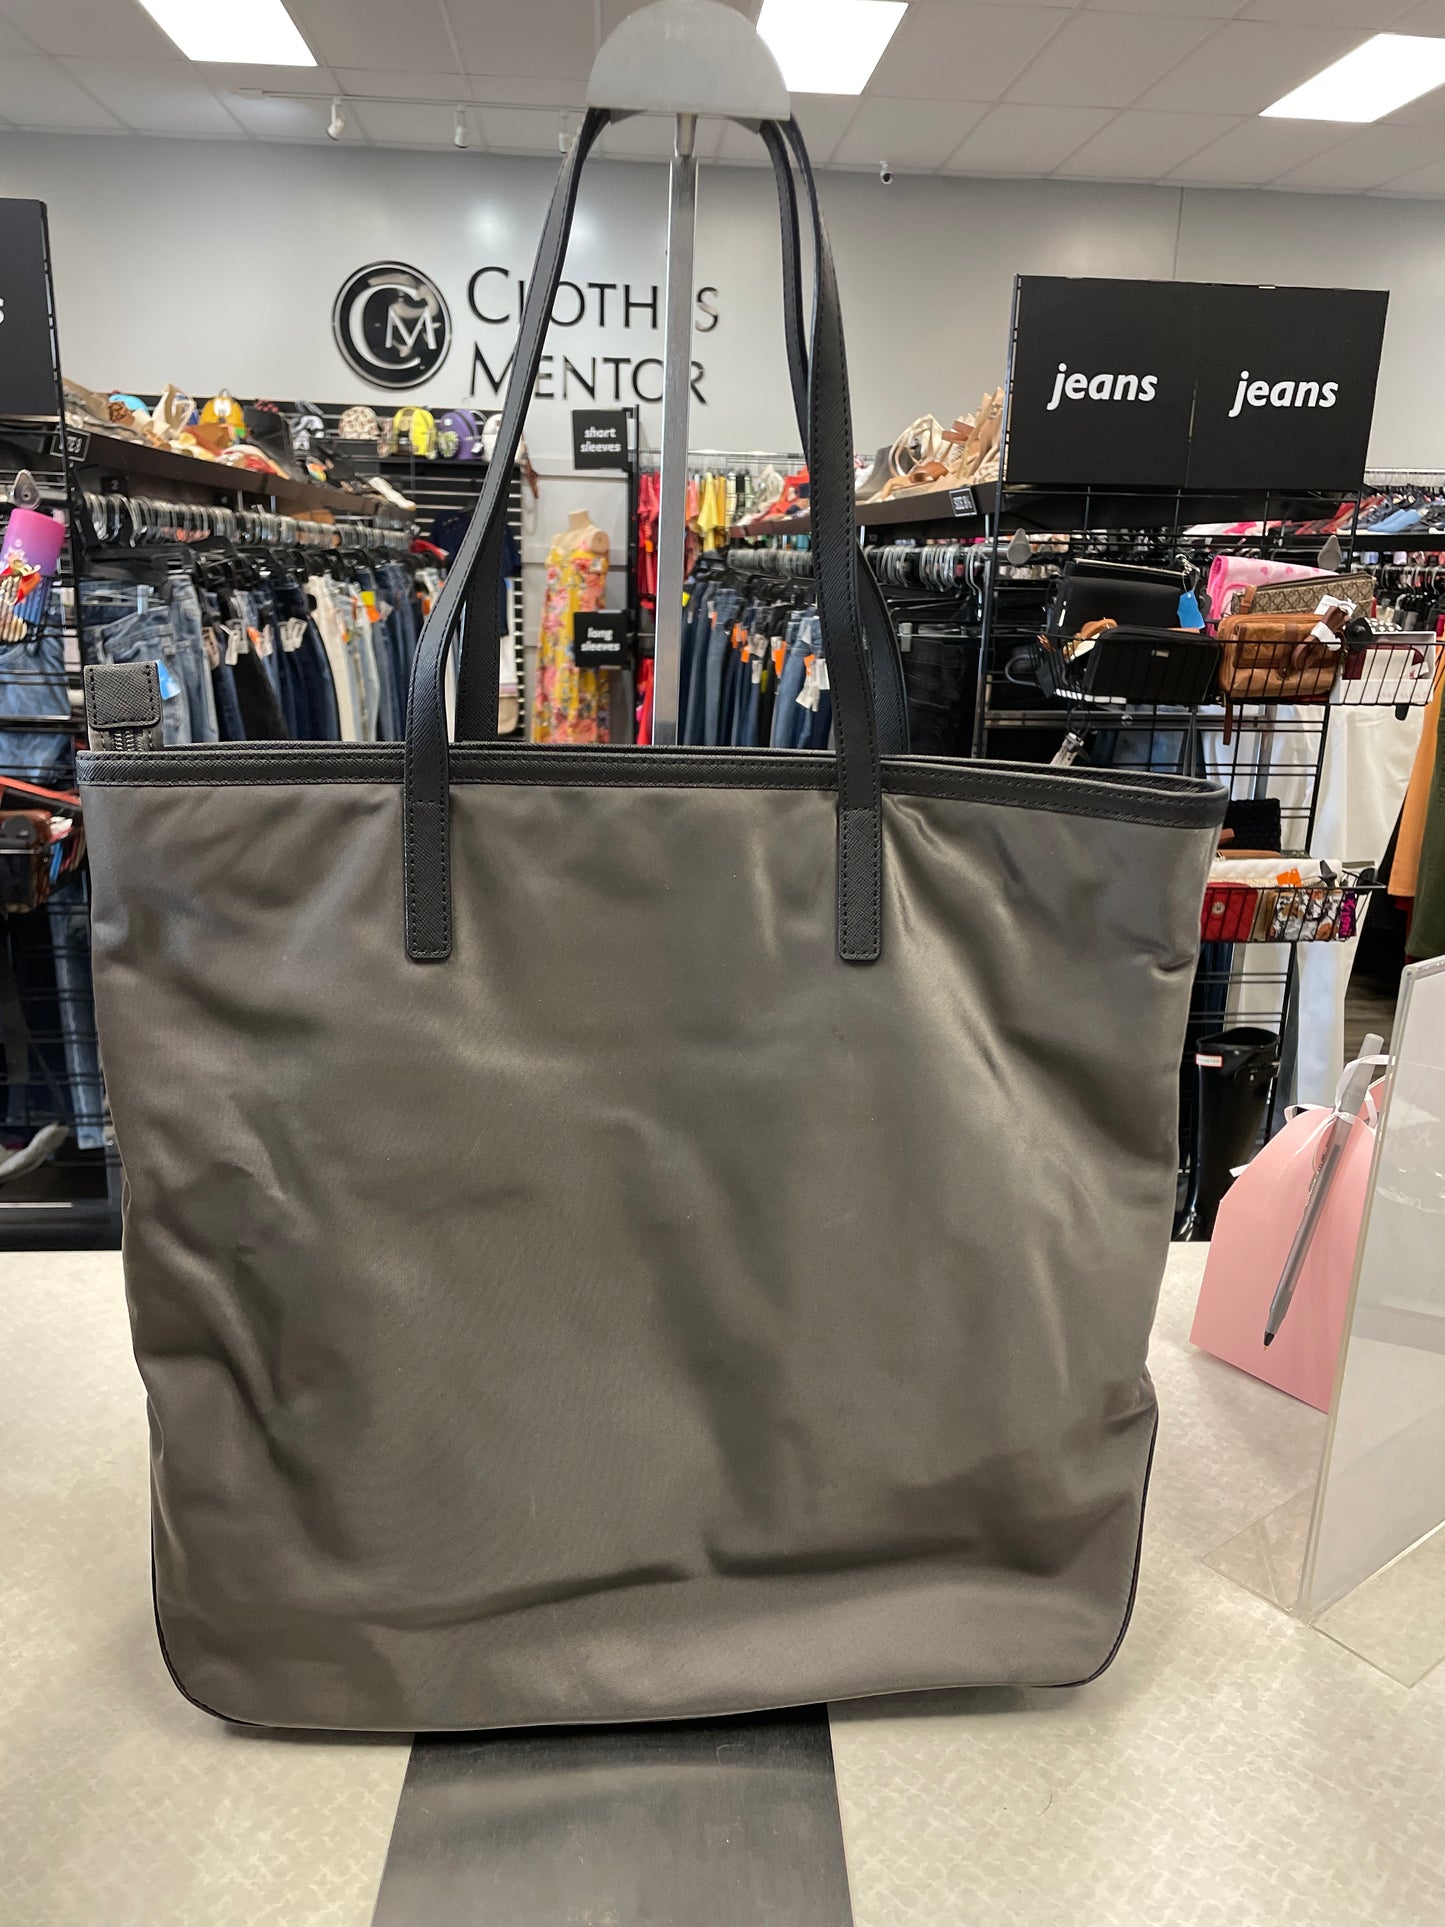 Tote By Michael Kors  Size: Medium